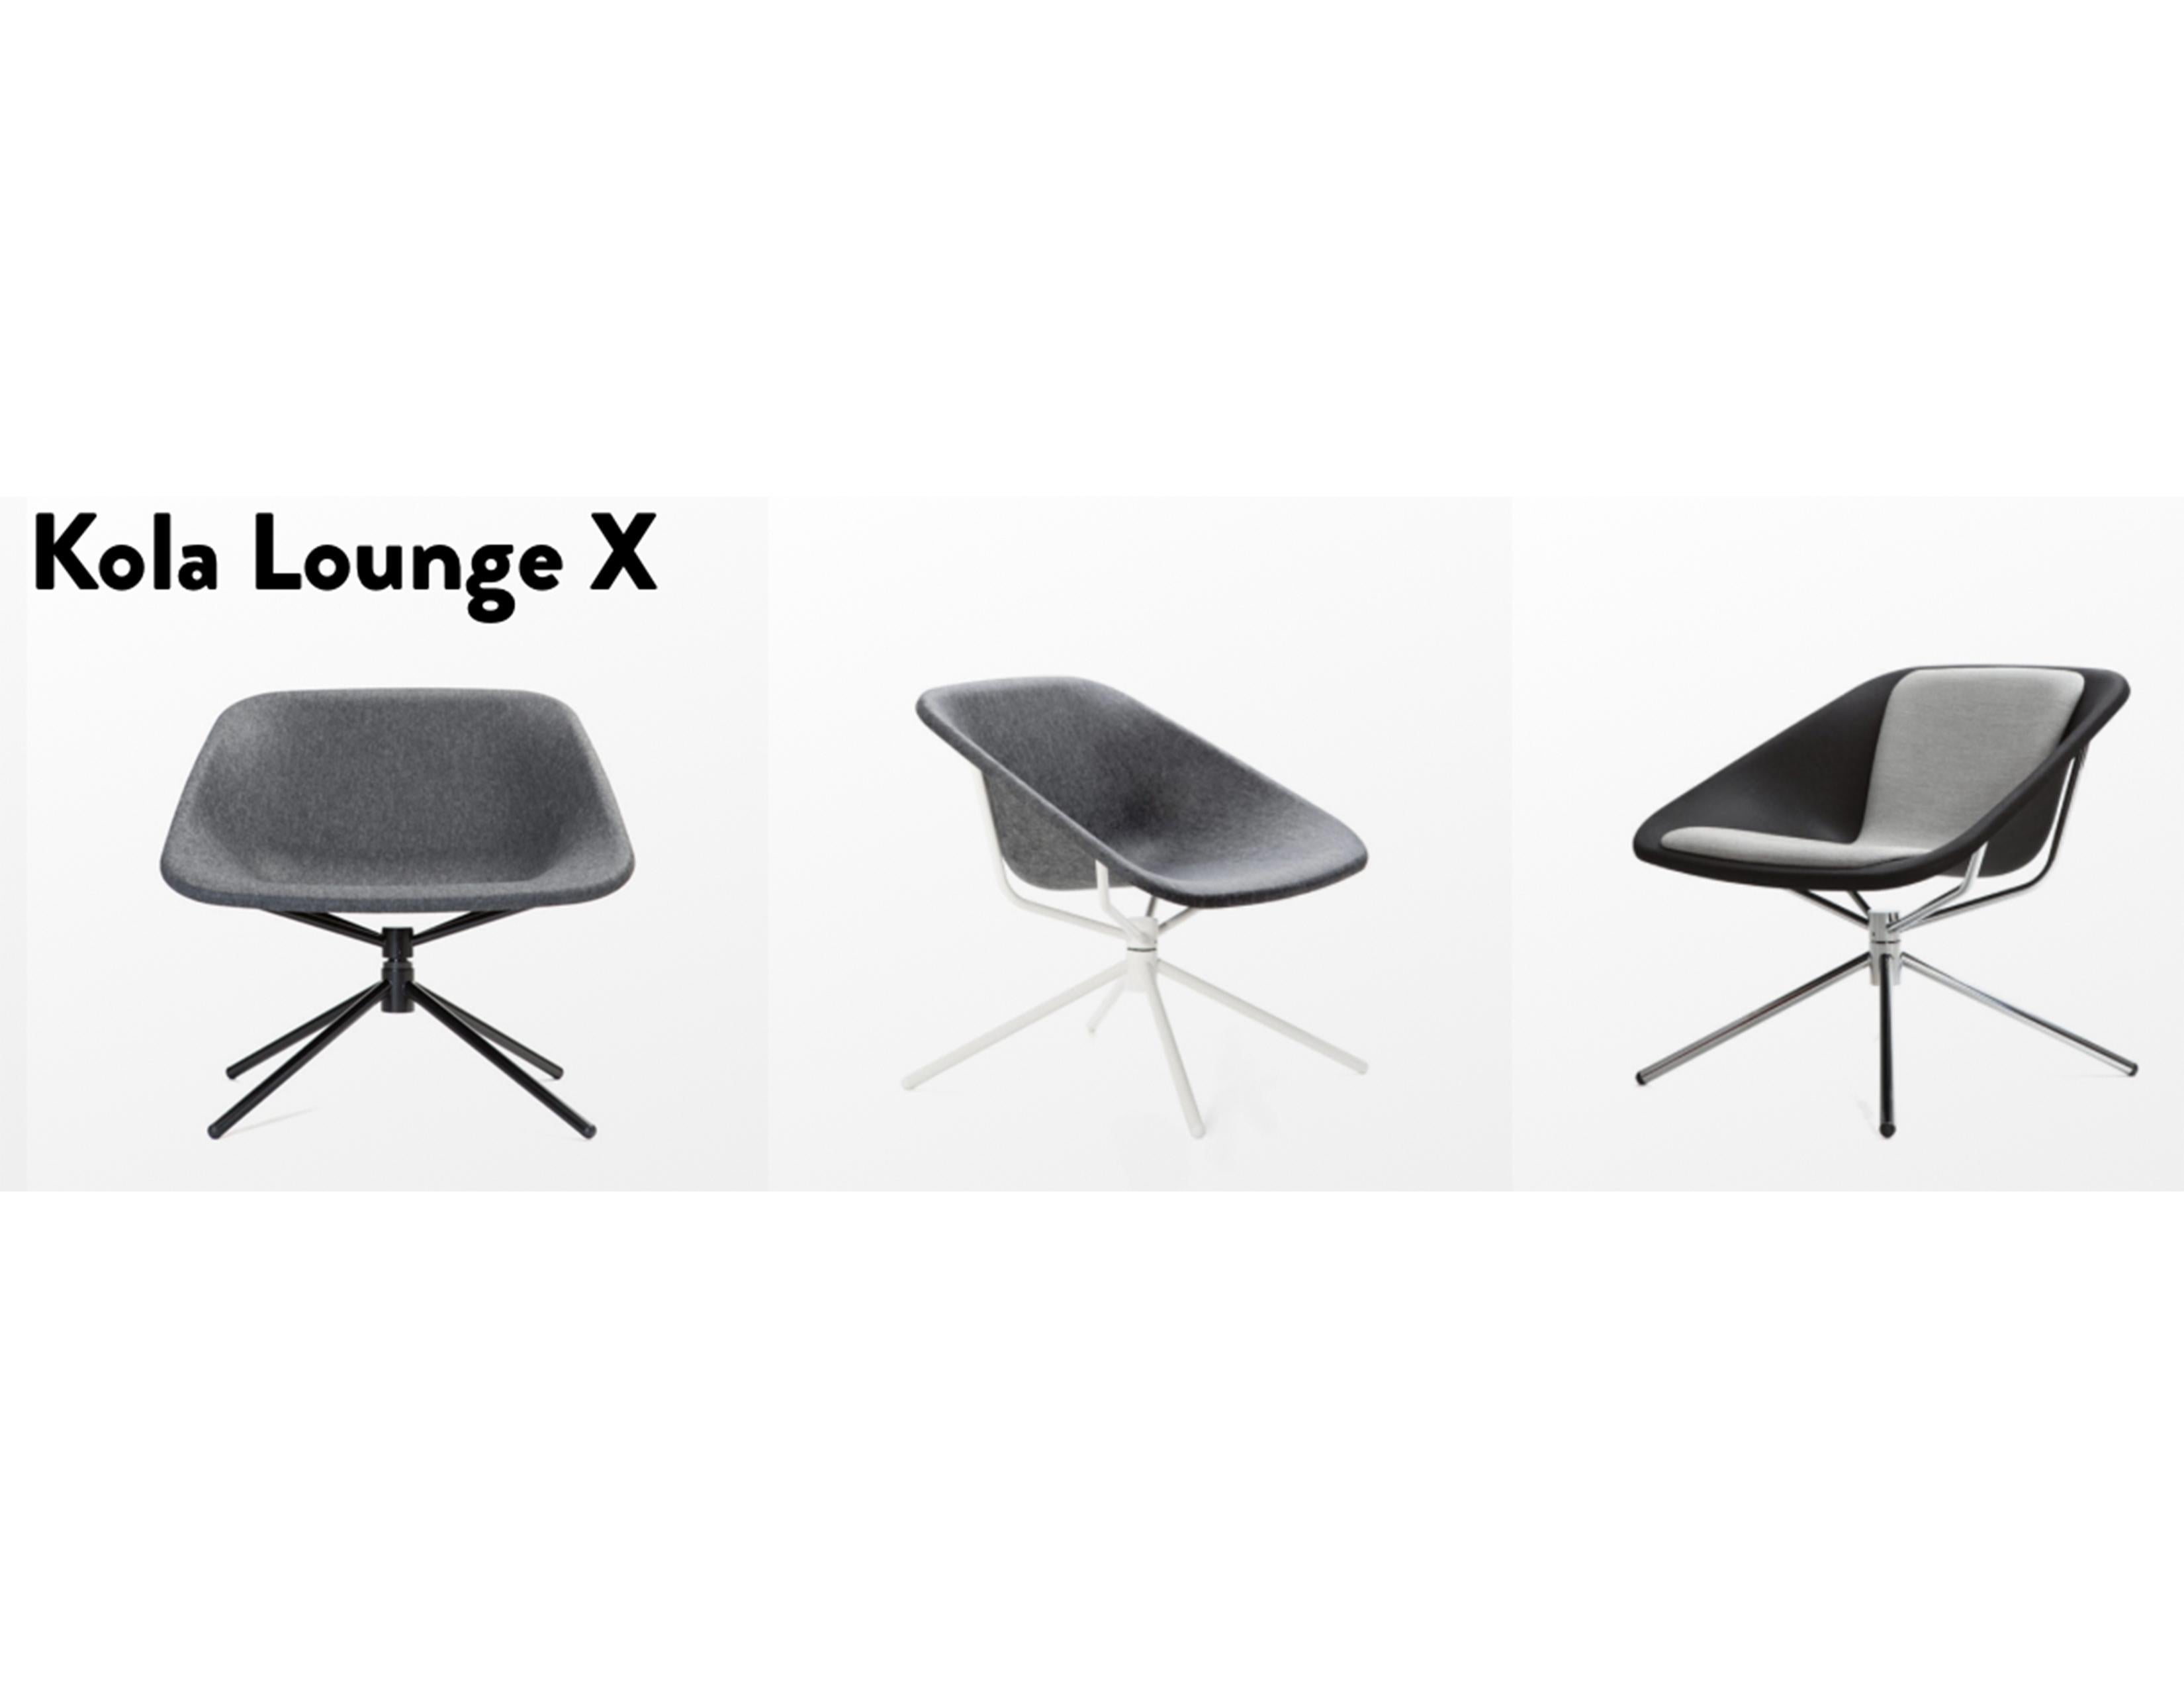 Kola Lounge X is a lounge chair that combines a generously proportioned synthetic felt seat with a durable steel swivel base. This combination of materials allows the chair to offer superb comfort, light weight and durability to lobbies, lounges and